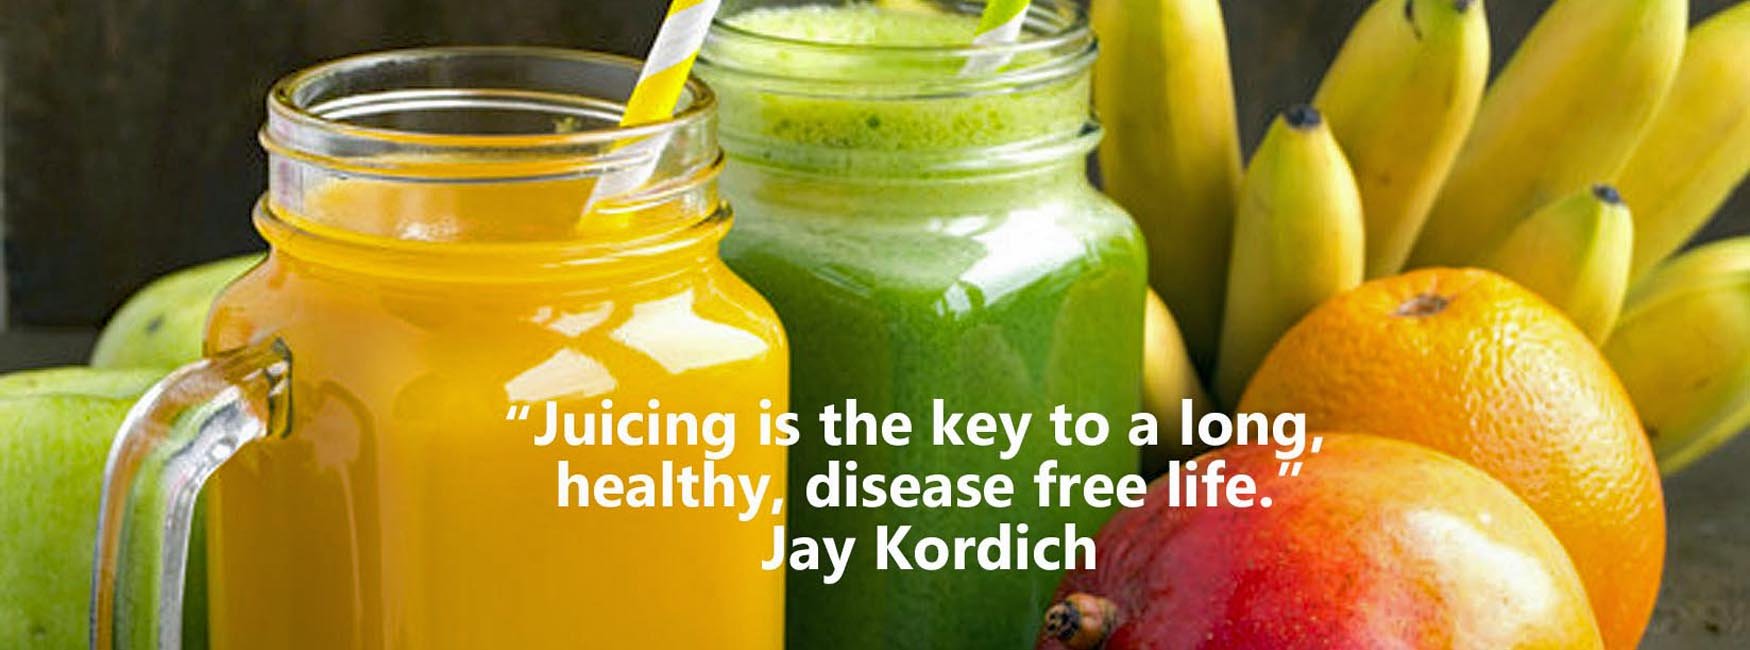 The benefits of juicing begin the moment you drink live juices that flood the cells with life giving nutrients.